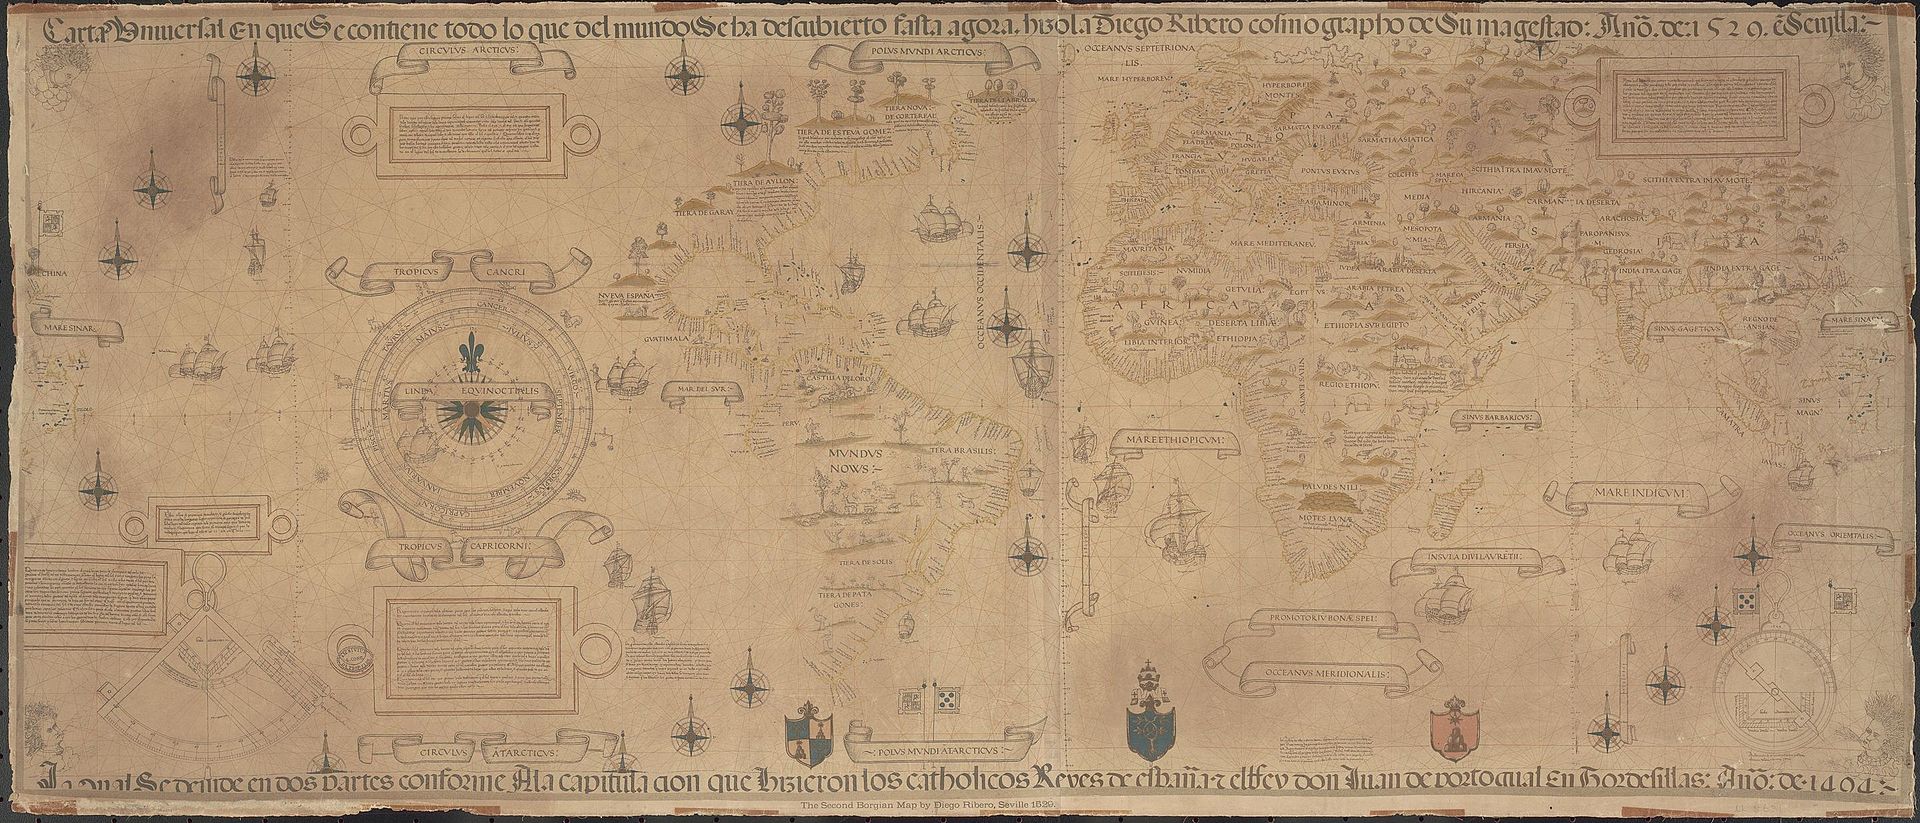 an old map from the 16th century with a strangely shaped western hemisphere